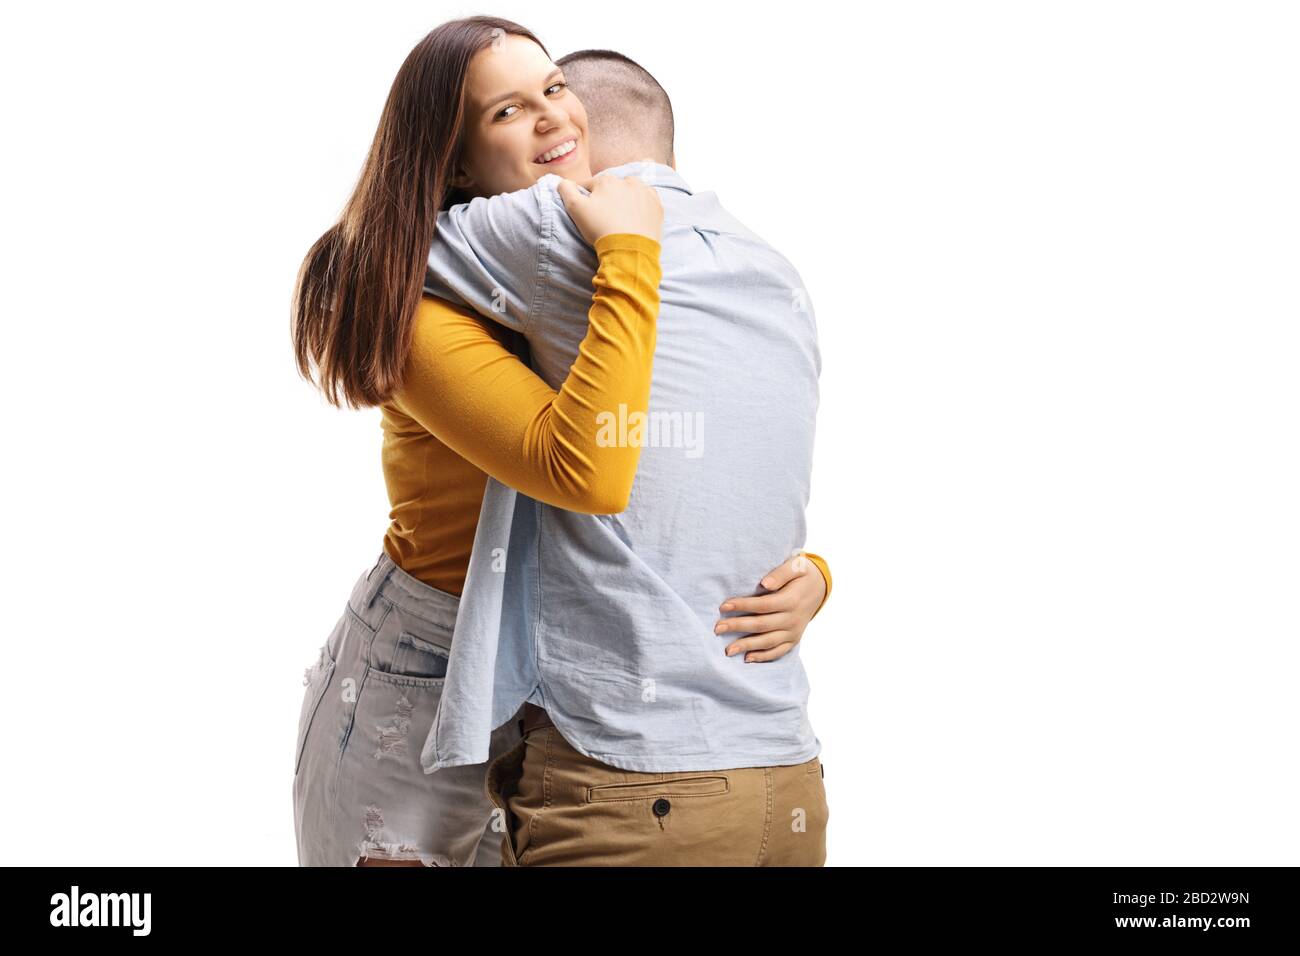 Young man and woman hugging each other isolated on white background Stock Photo